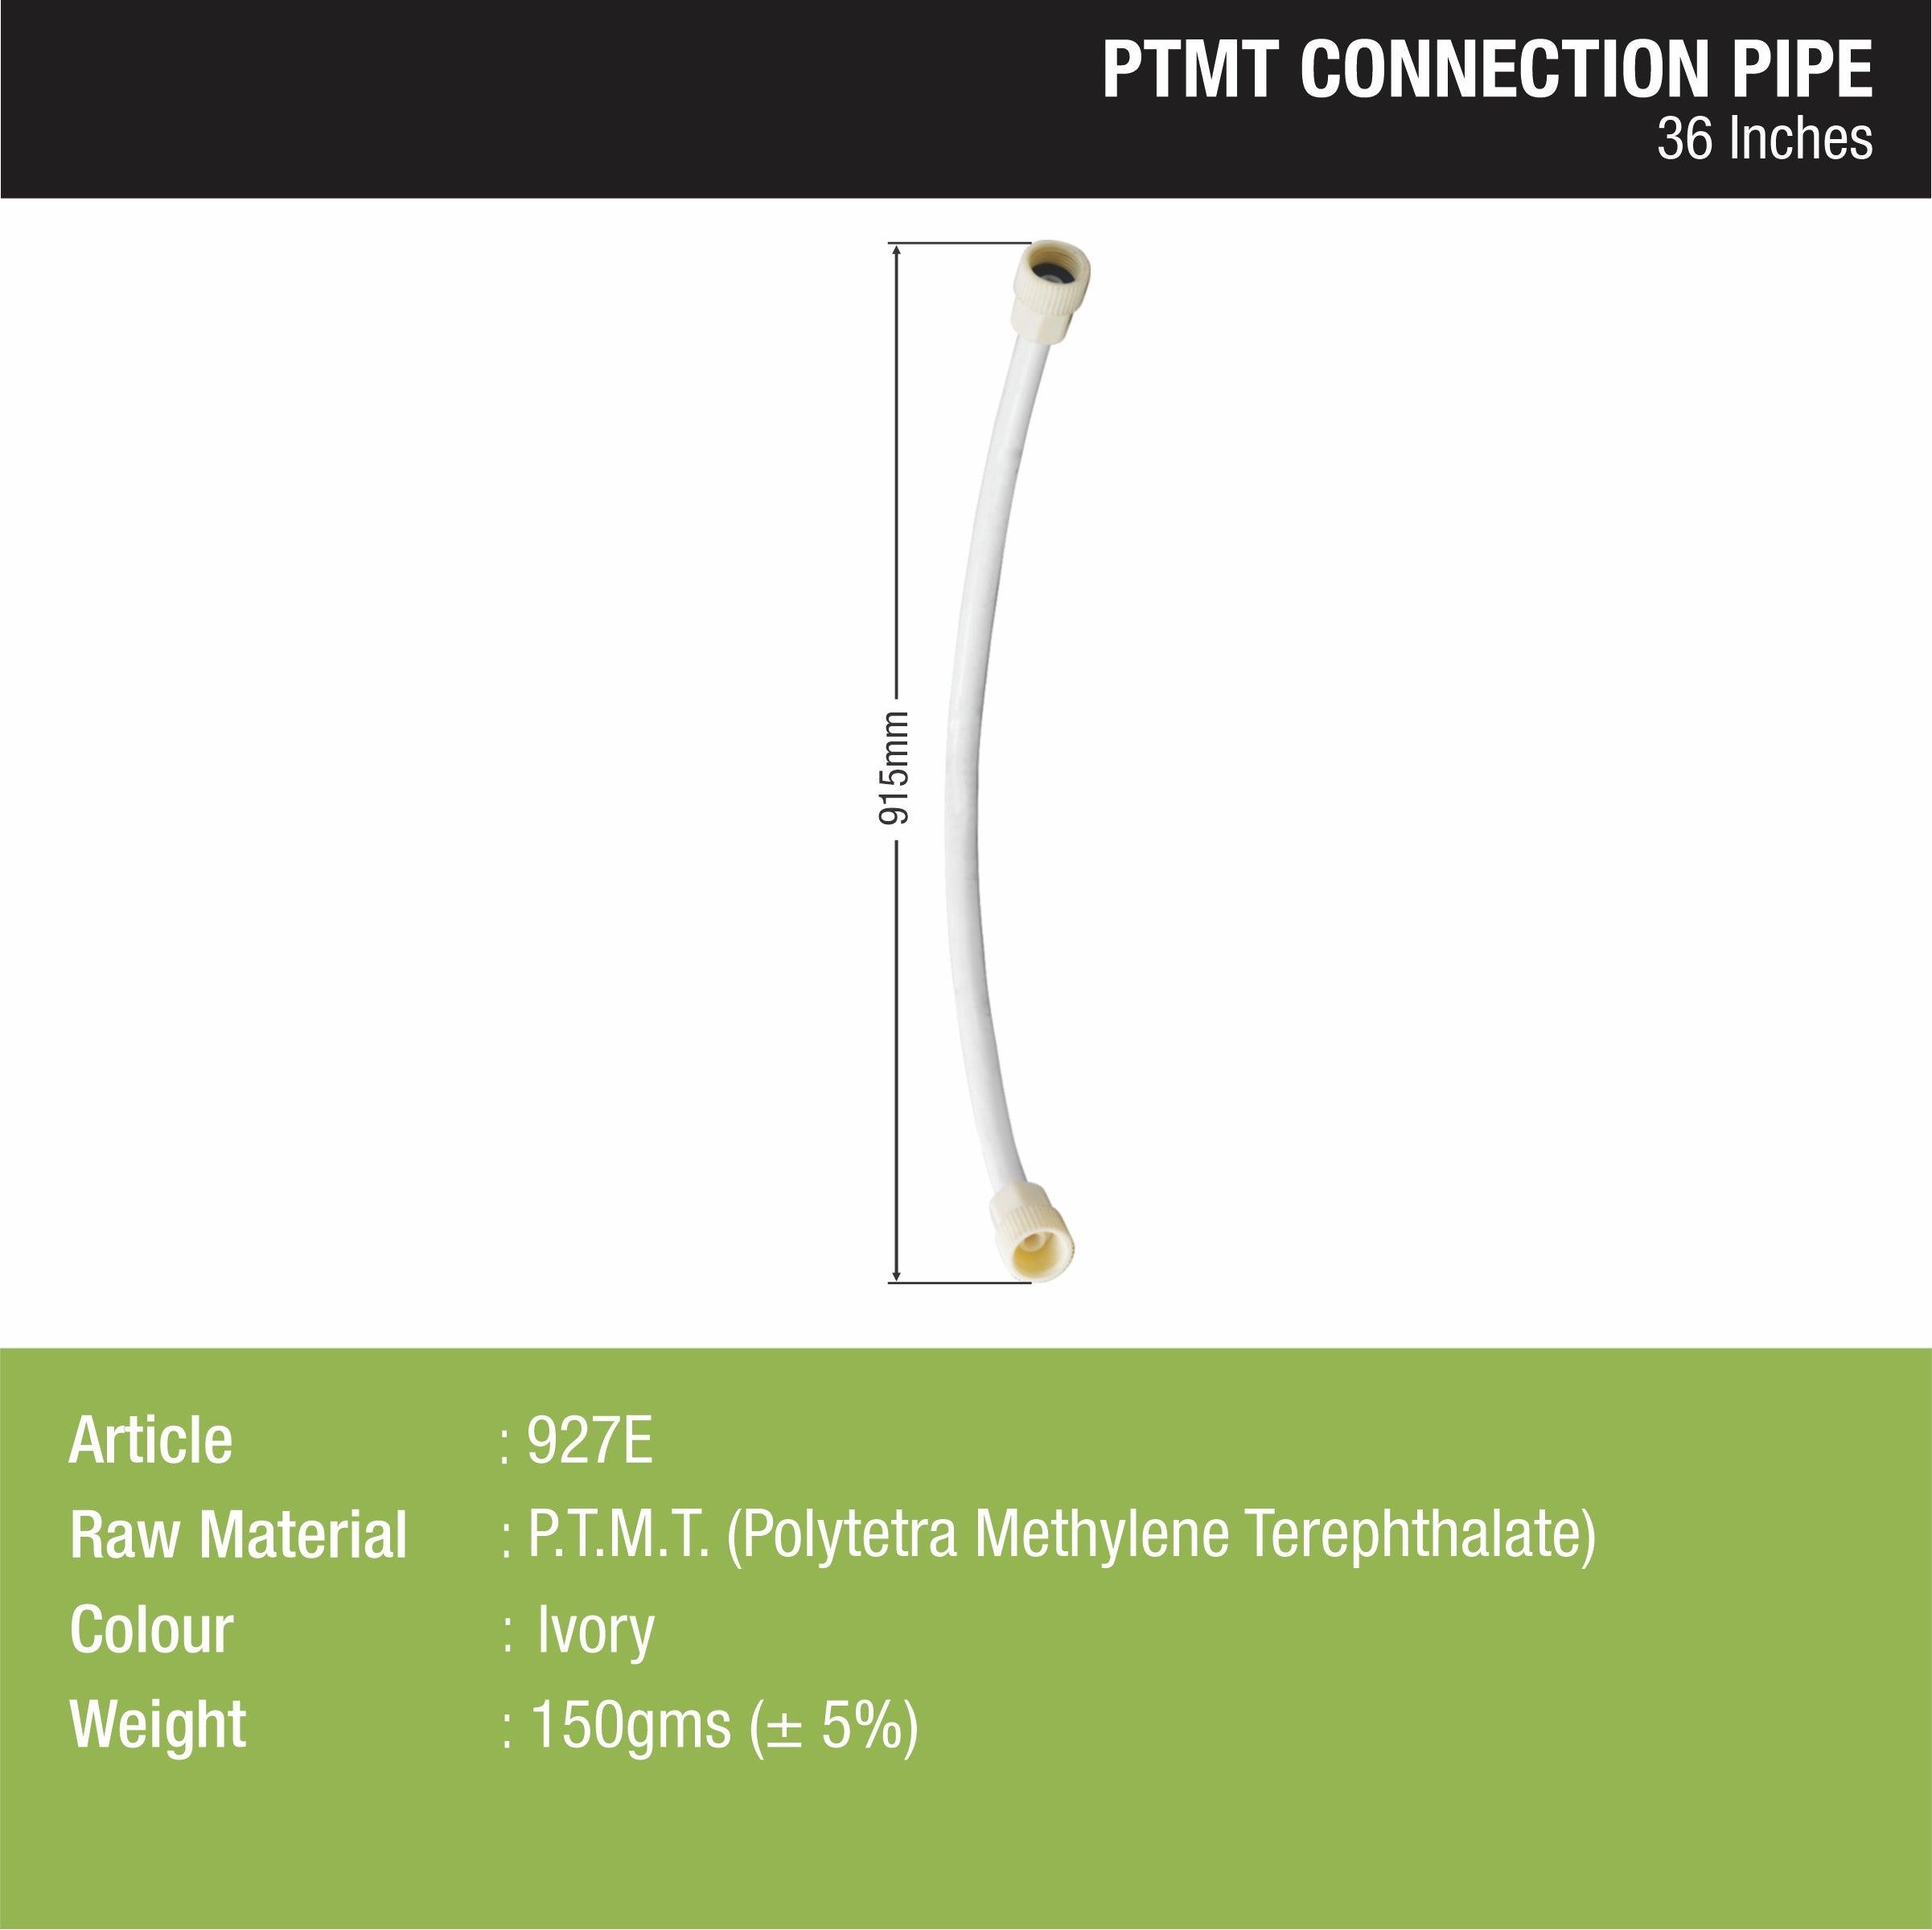 Connection Pipe PTMT (36 Inches) sizes and dimensions